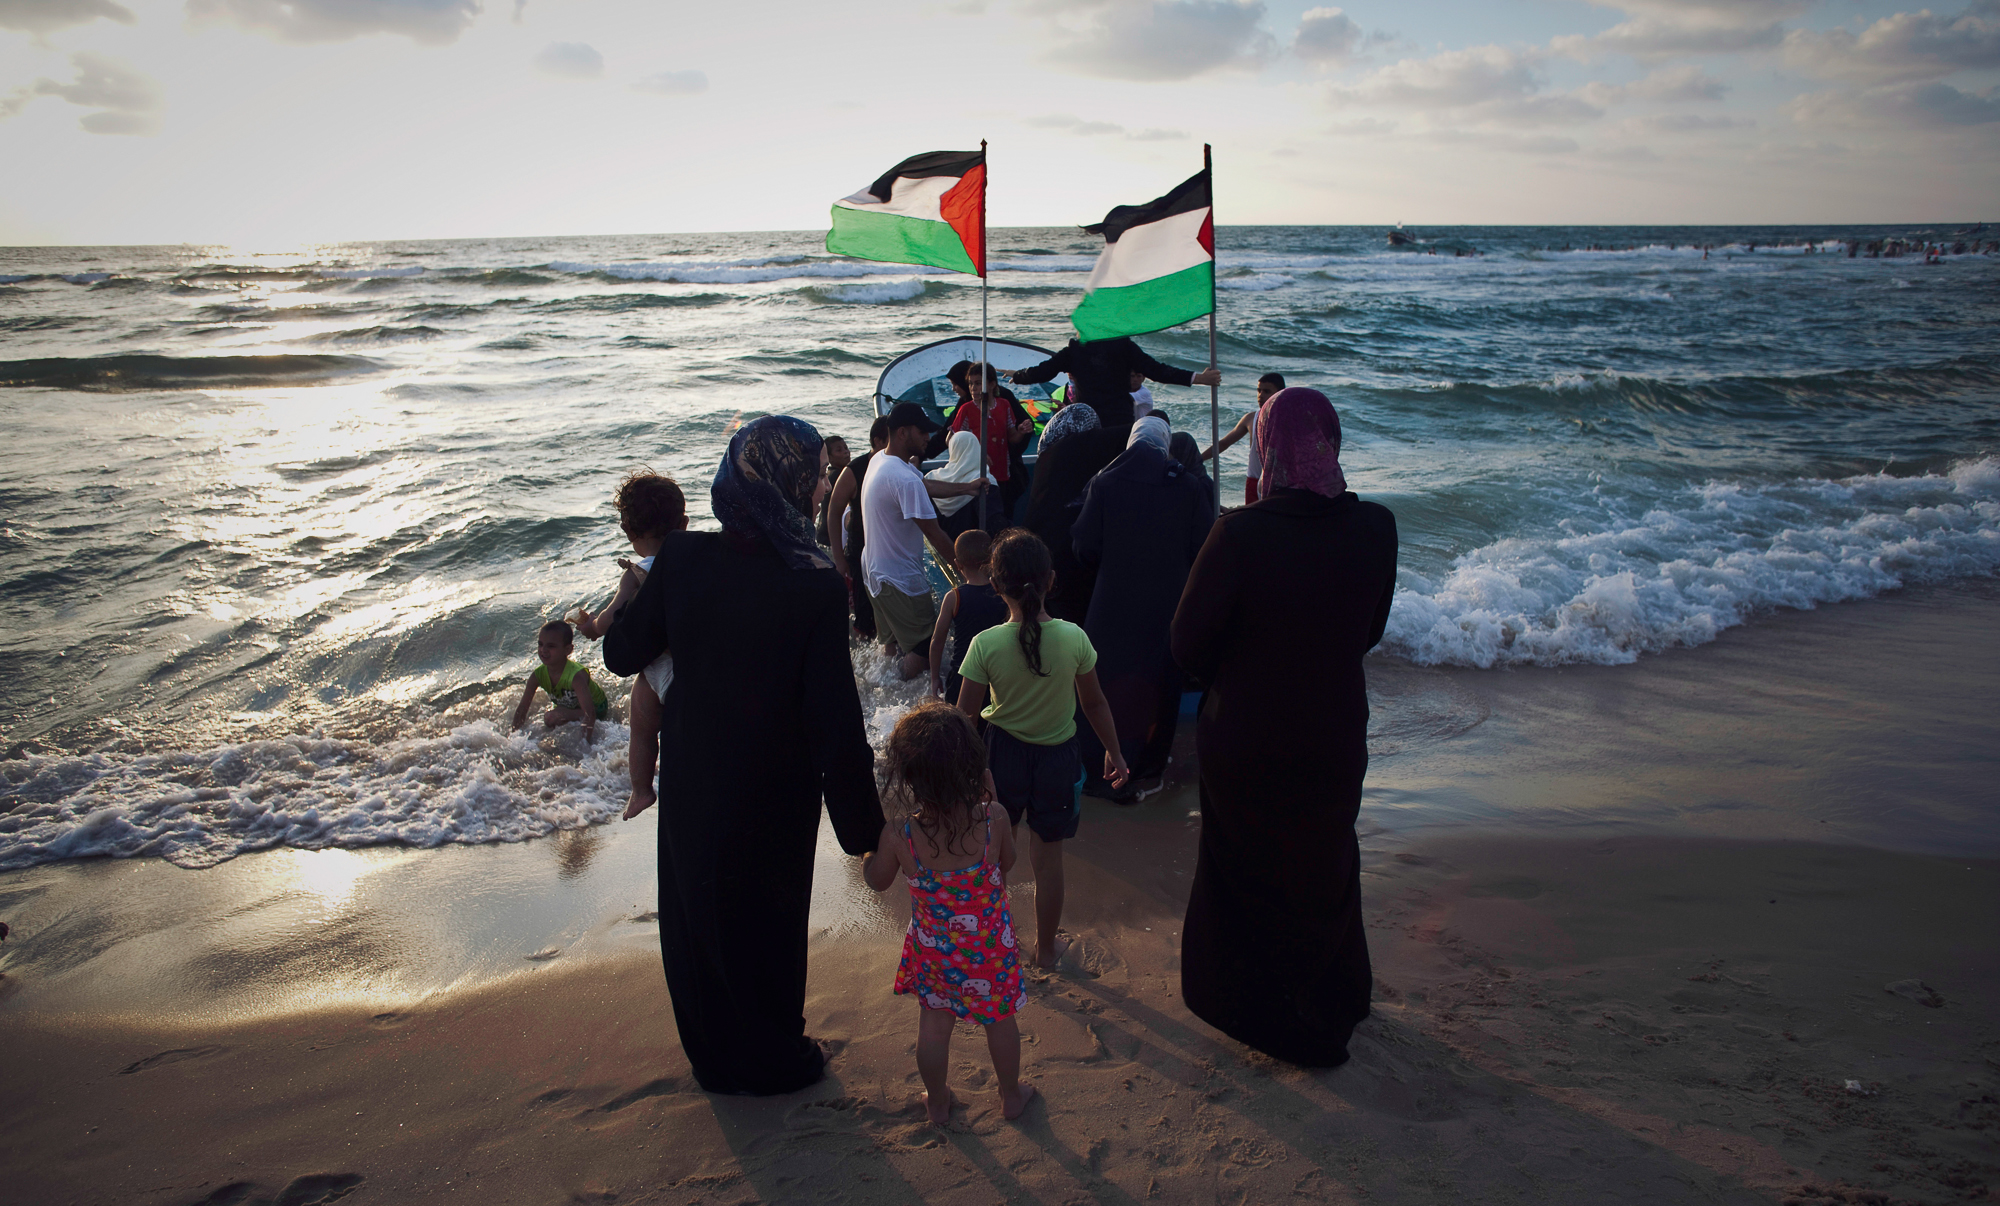 Palestinian women and children waiting for their turn for a boat ride in Gaza's sea. Photo by Eman Mohammed/Getty Images for WHAT'S NEXT